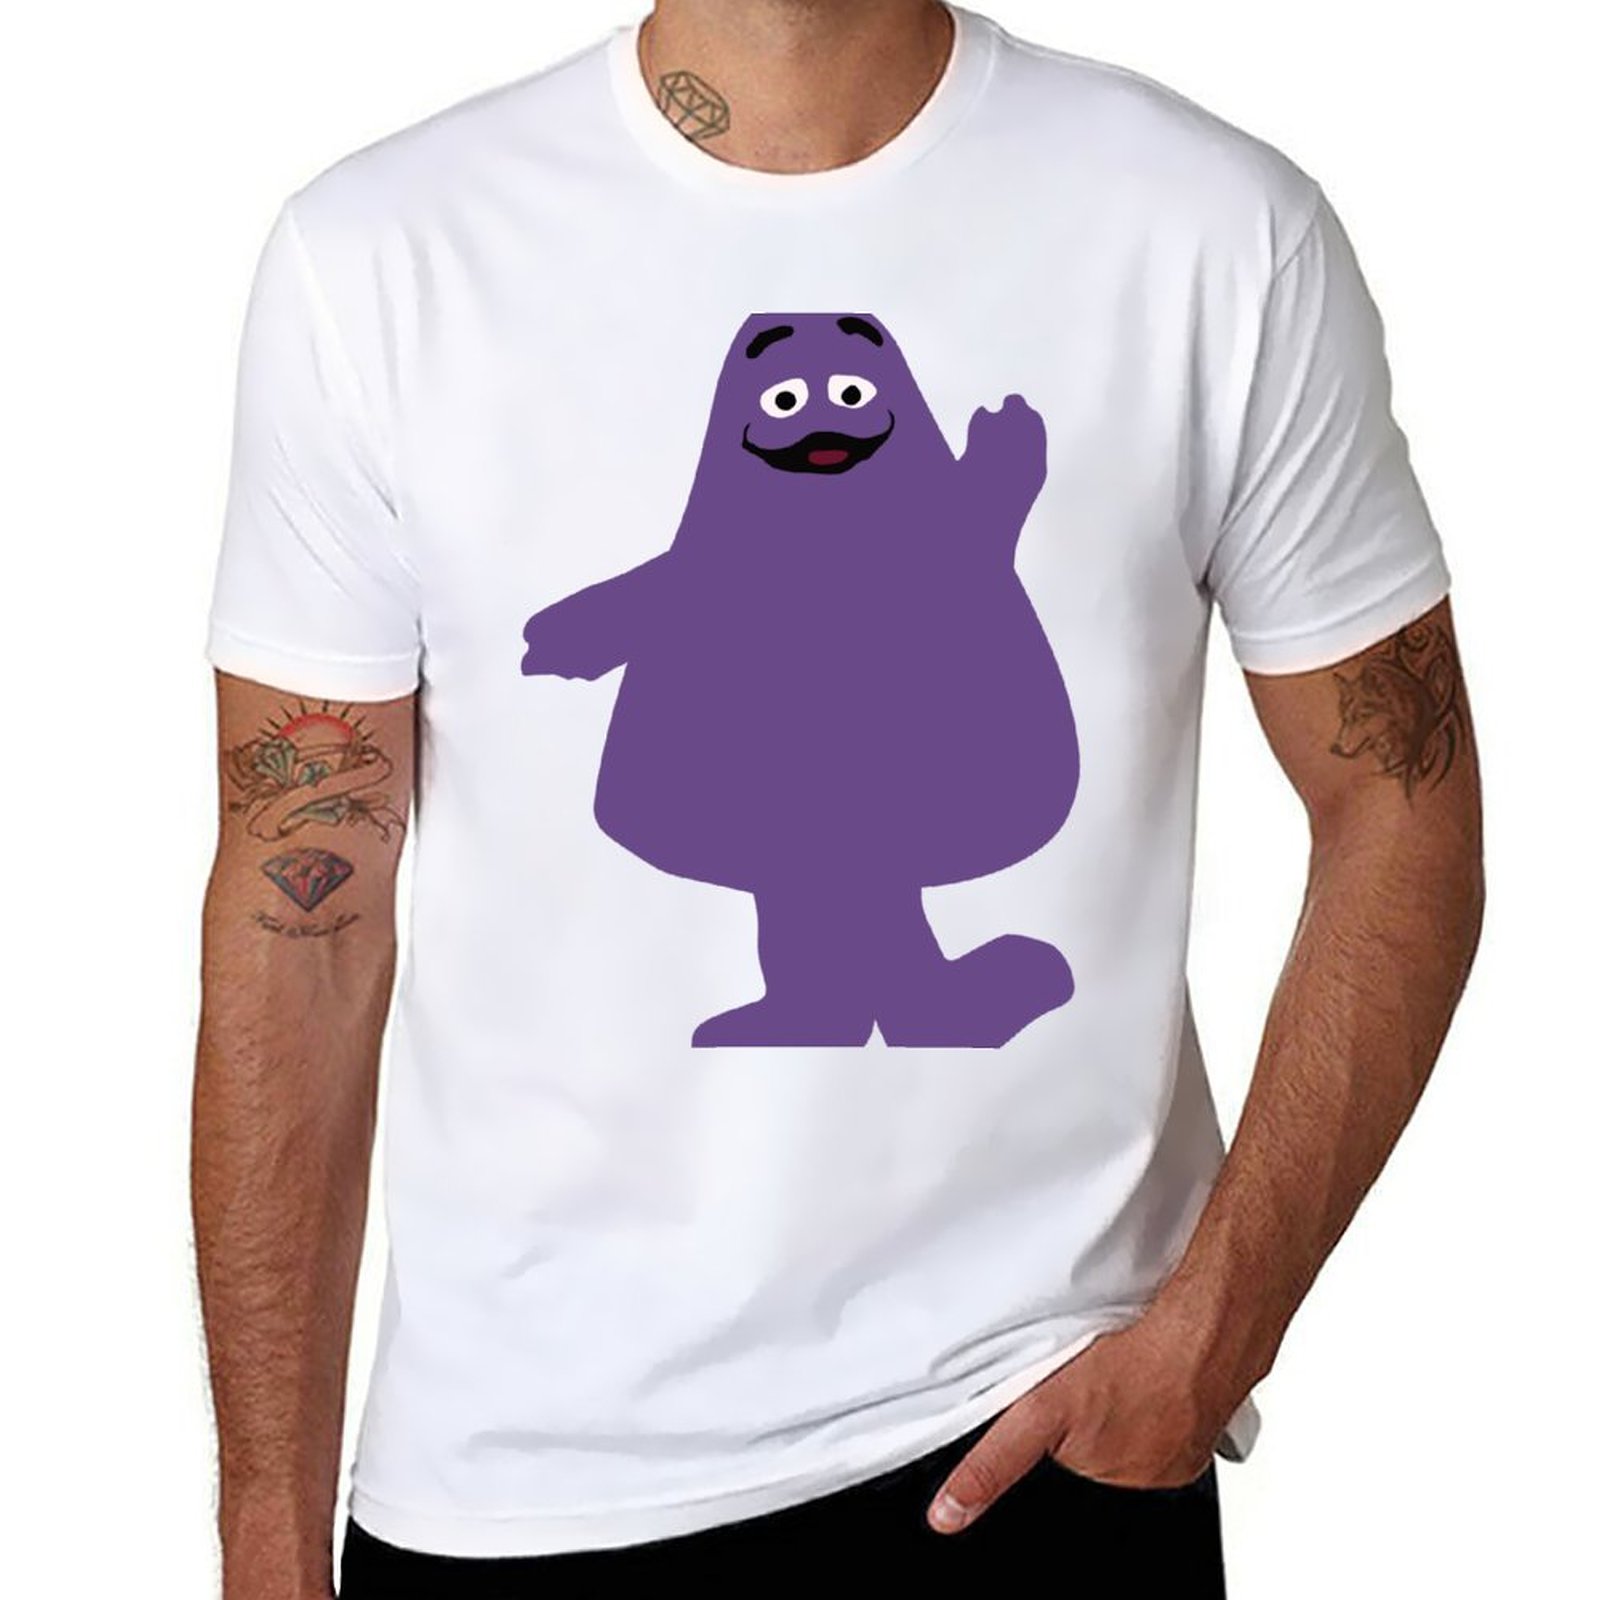 New Grimace T Shirt Tee shirt graphic t shirts boys white t shirts quick drying t - Grimace Plush